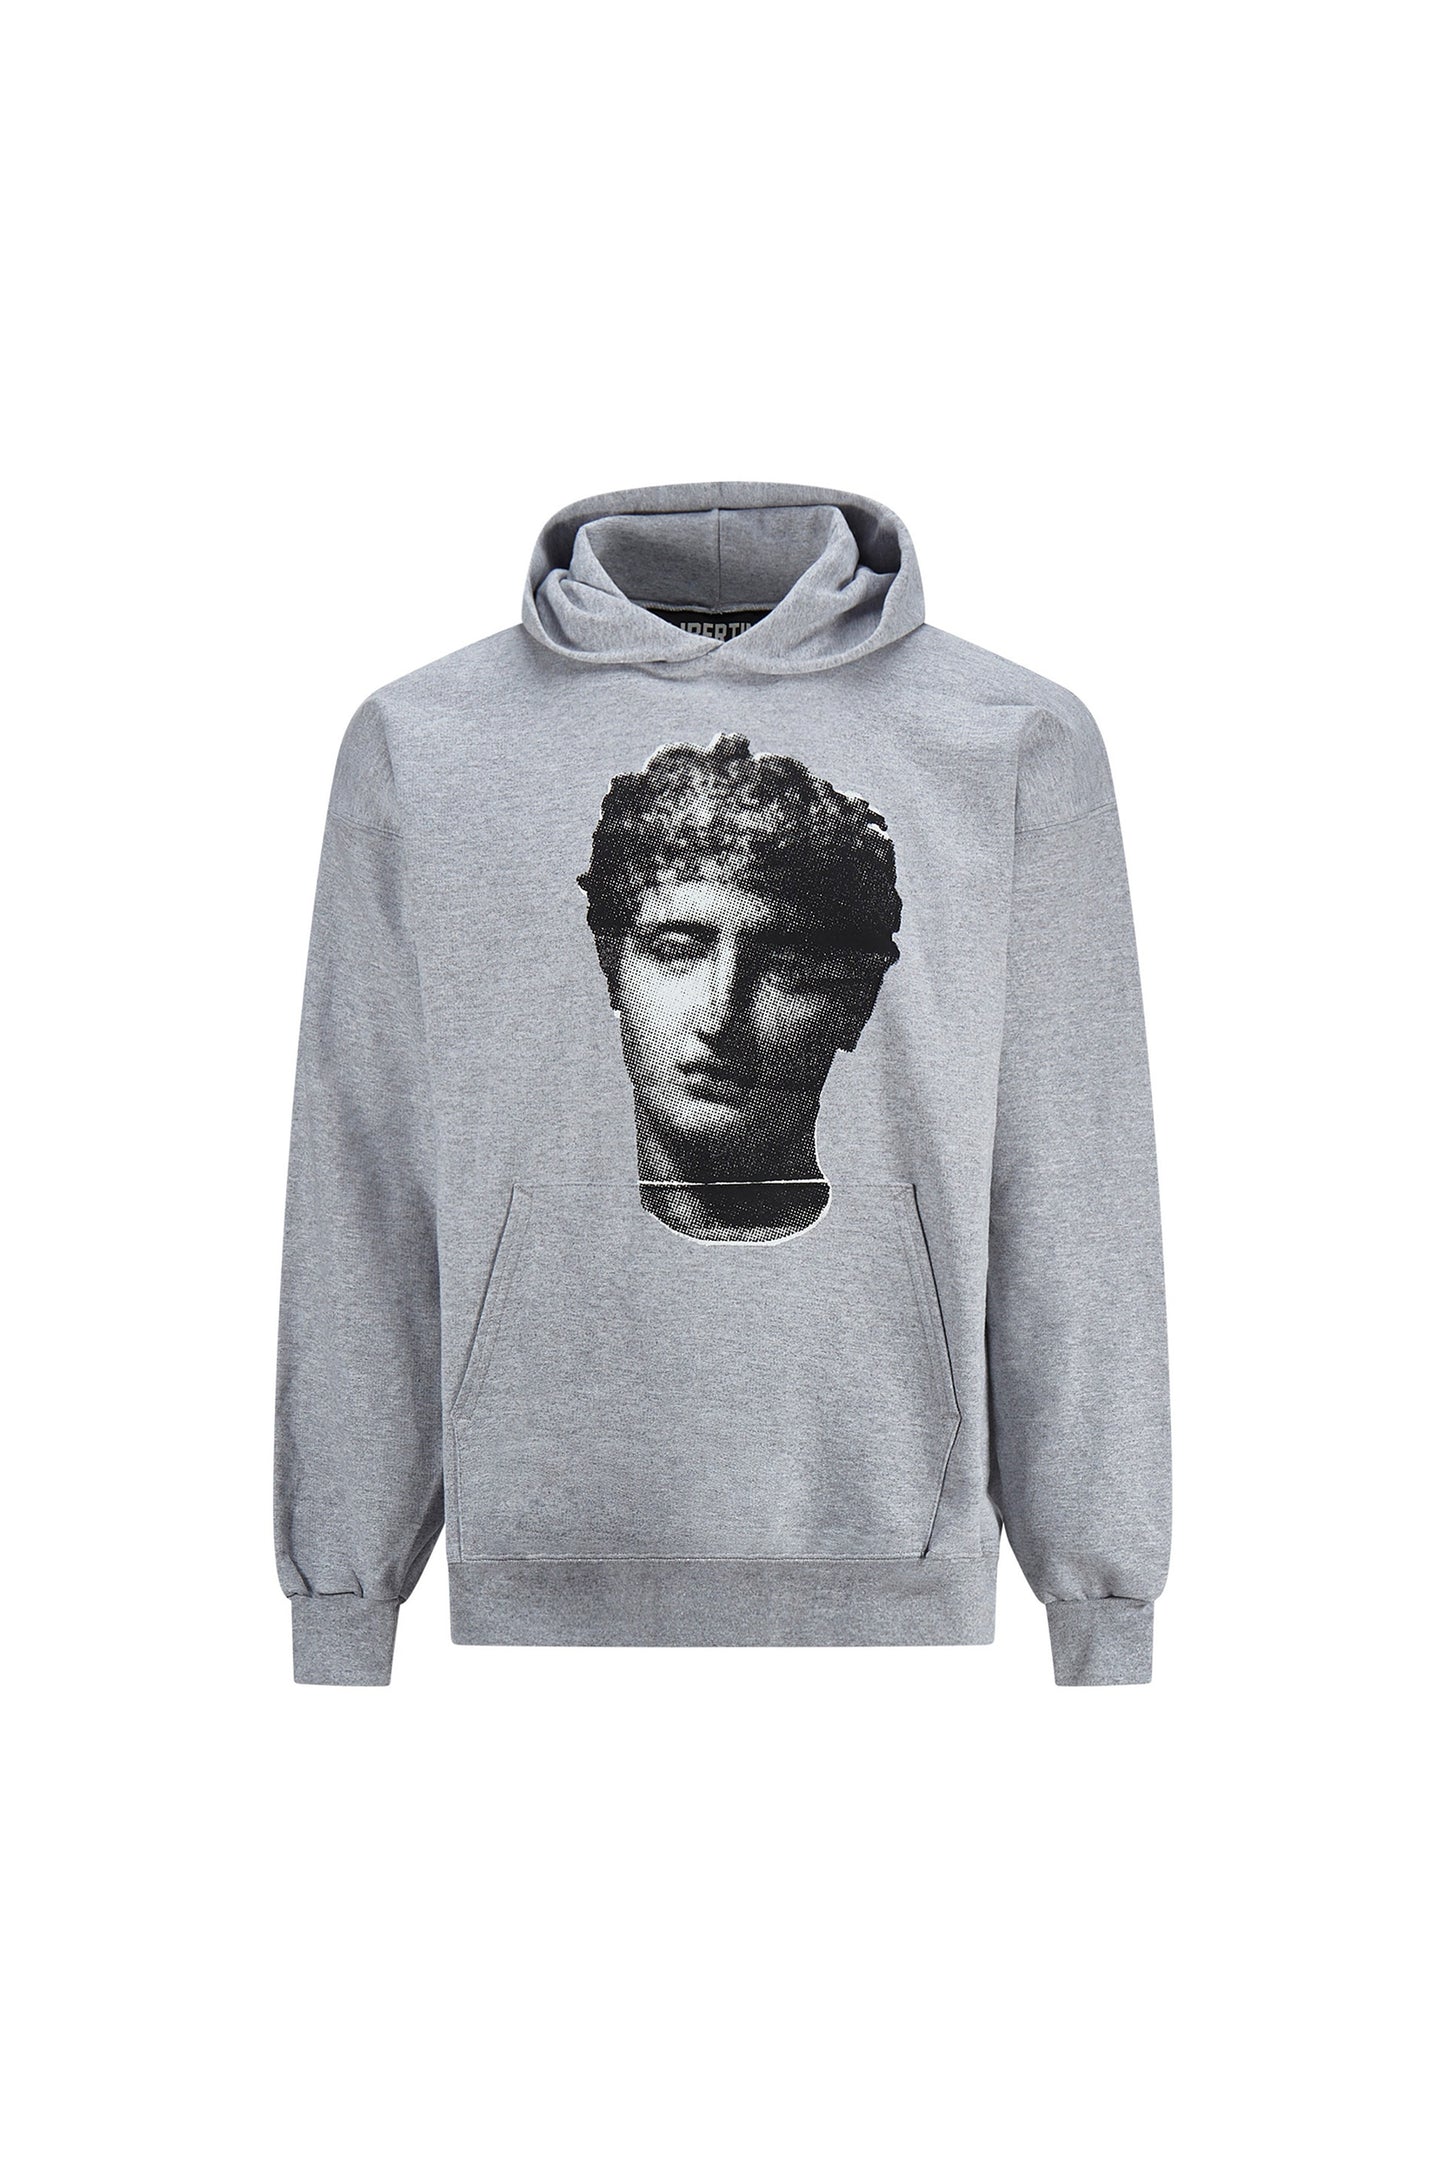 'CUPID AND PSYCHE' PULLOVER HOODIE -  - Libertine